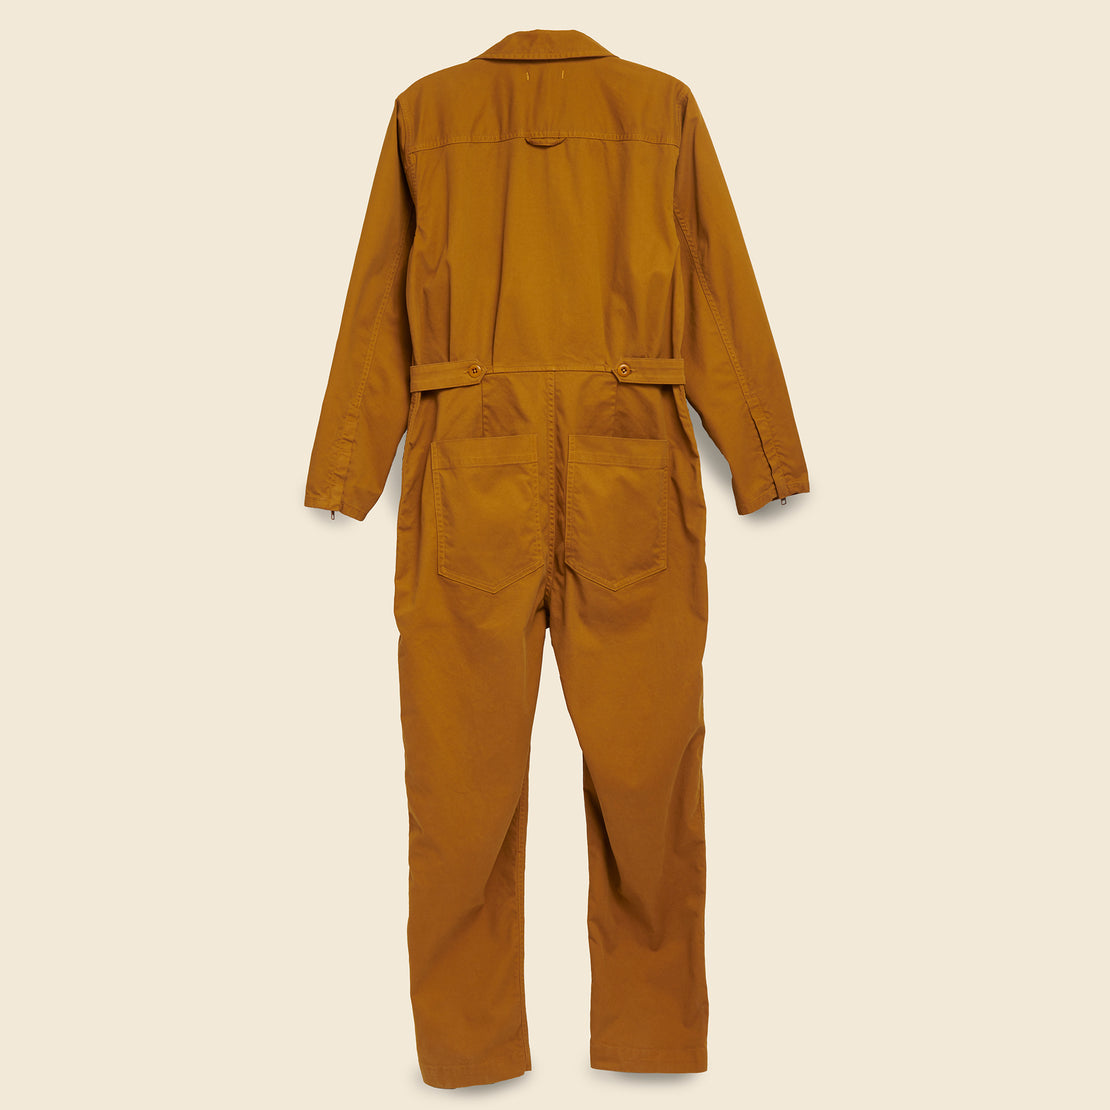 Judd Jumpsuit - Gold Clay - Alex Mill - STAG Provisions - W - Onepiece - Jumpsuit